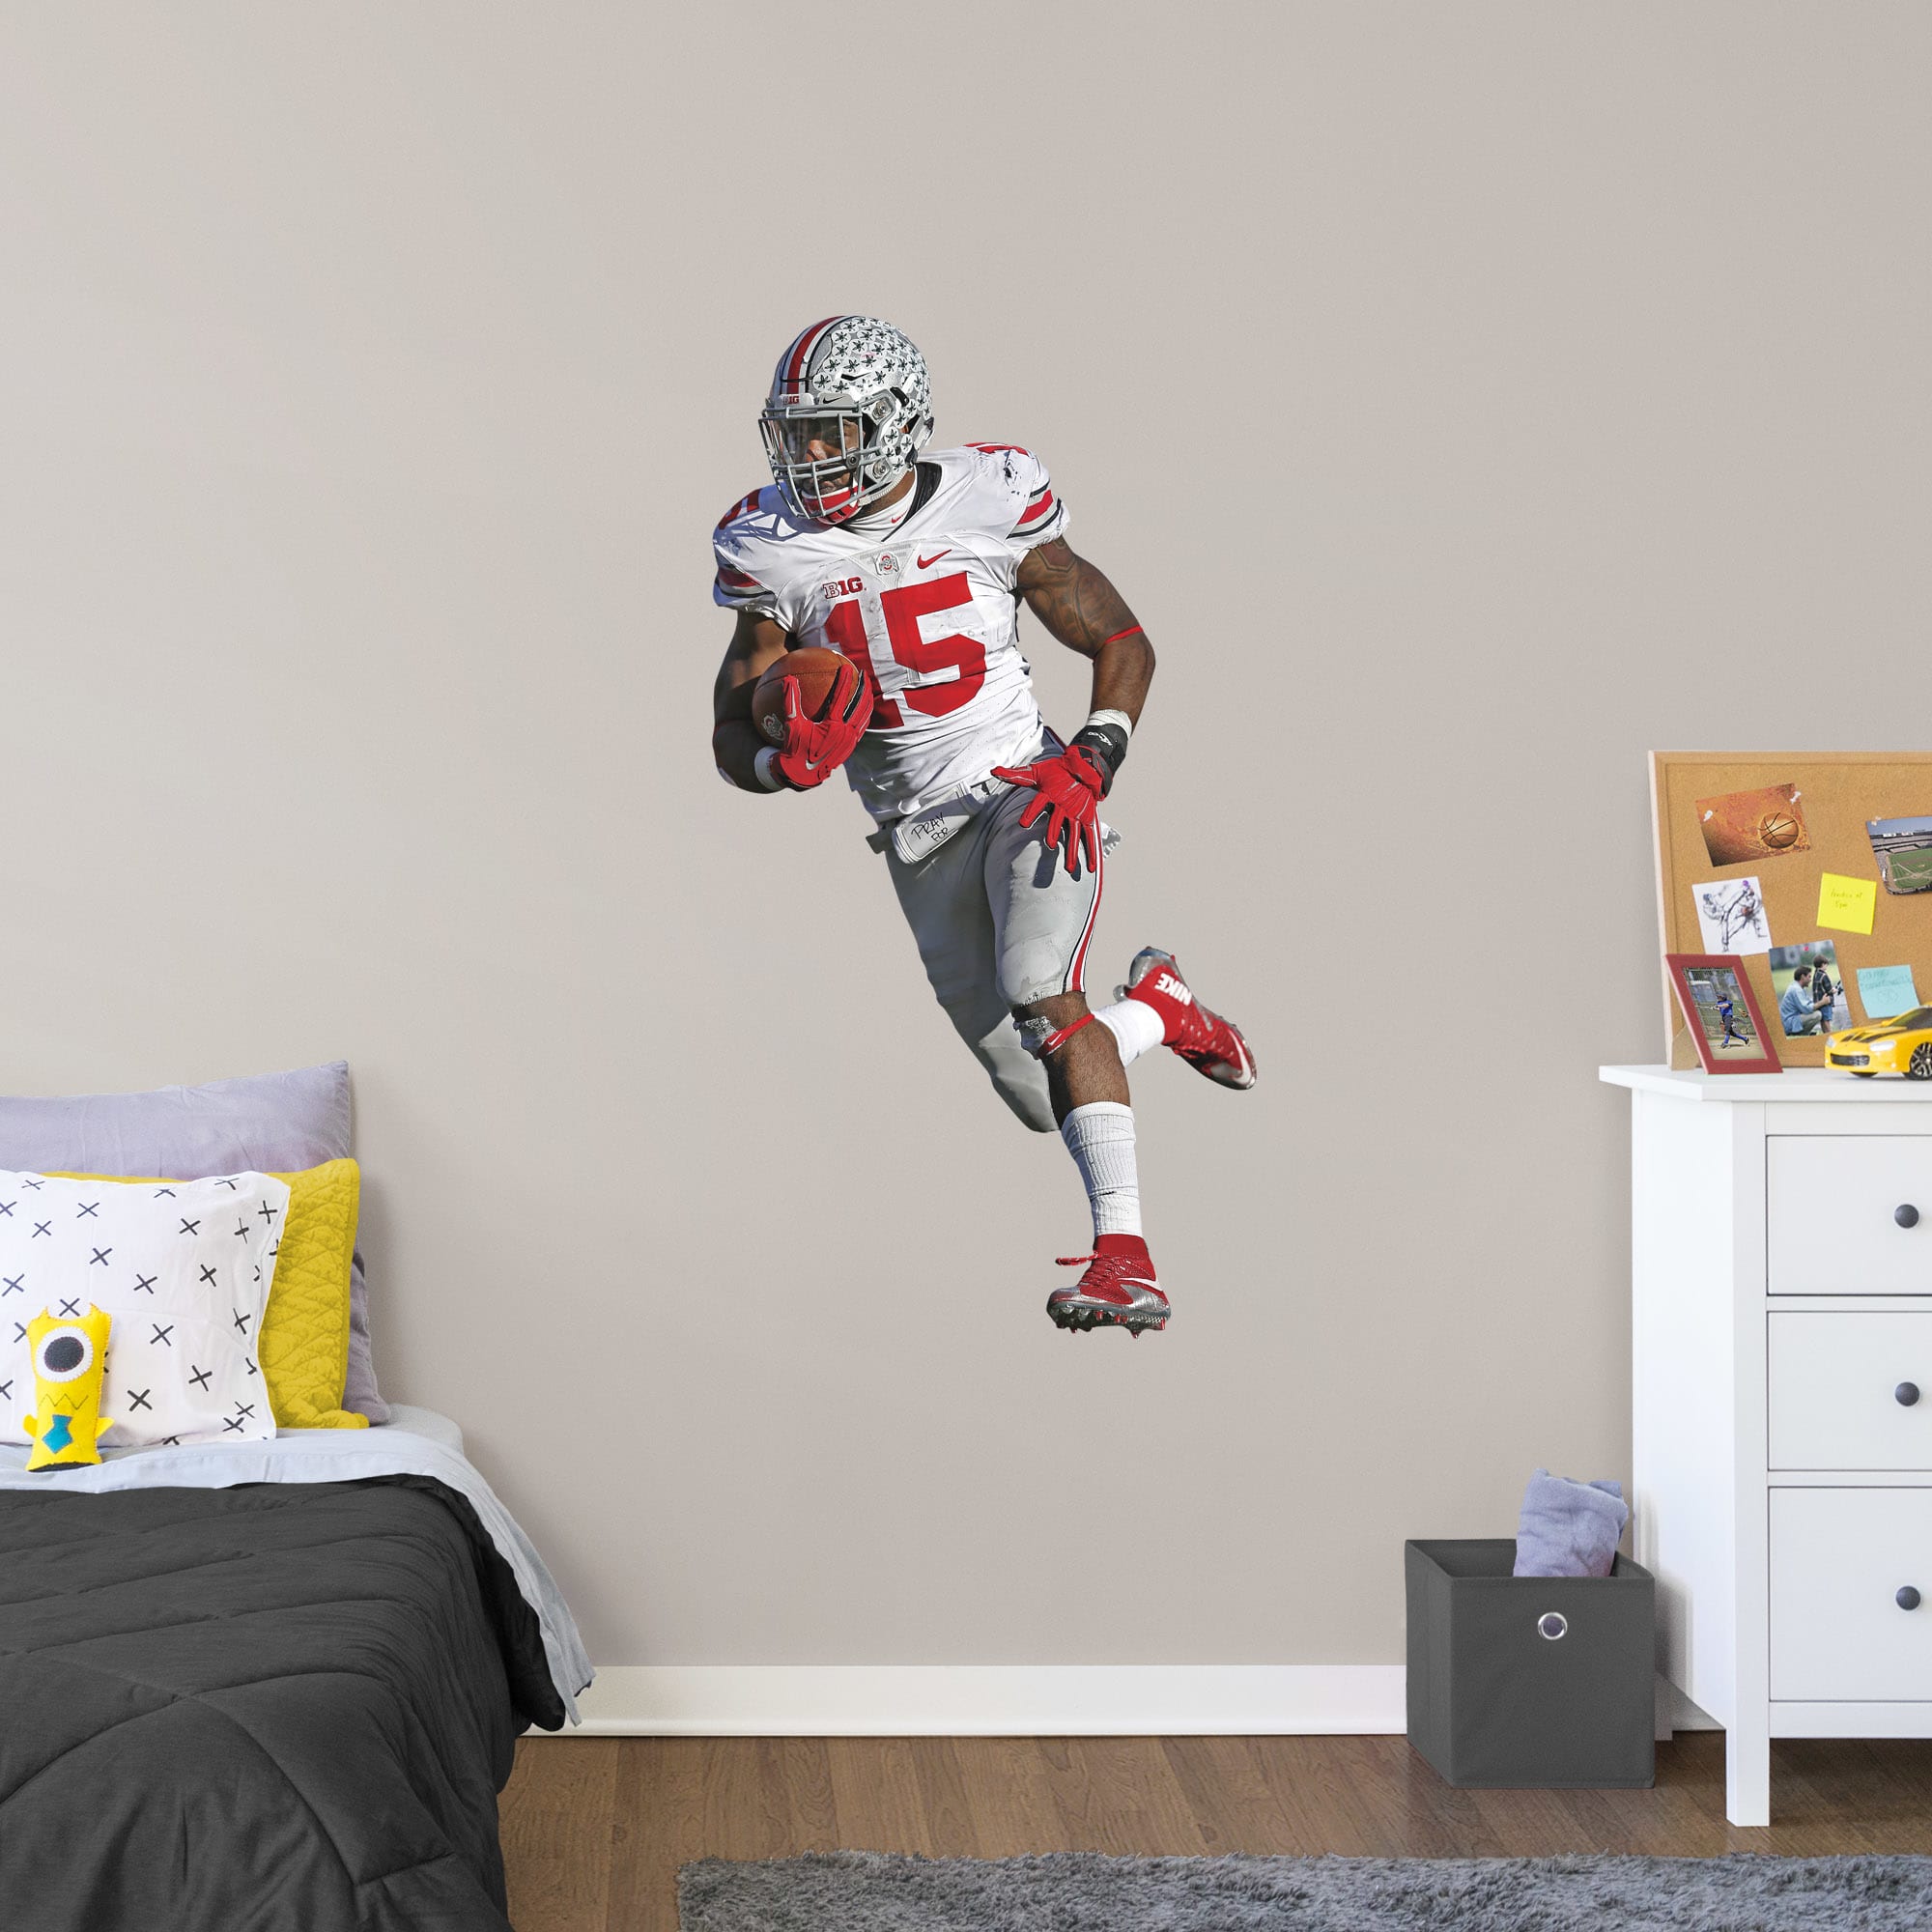 Ezekiel Elliott for Ohio State Buckeyes: Ohio State - Officially Licensed Removable Wall Decal Giant Athlete + 2 Decals (28"W x